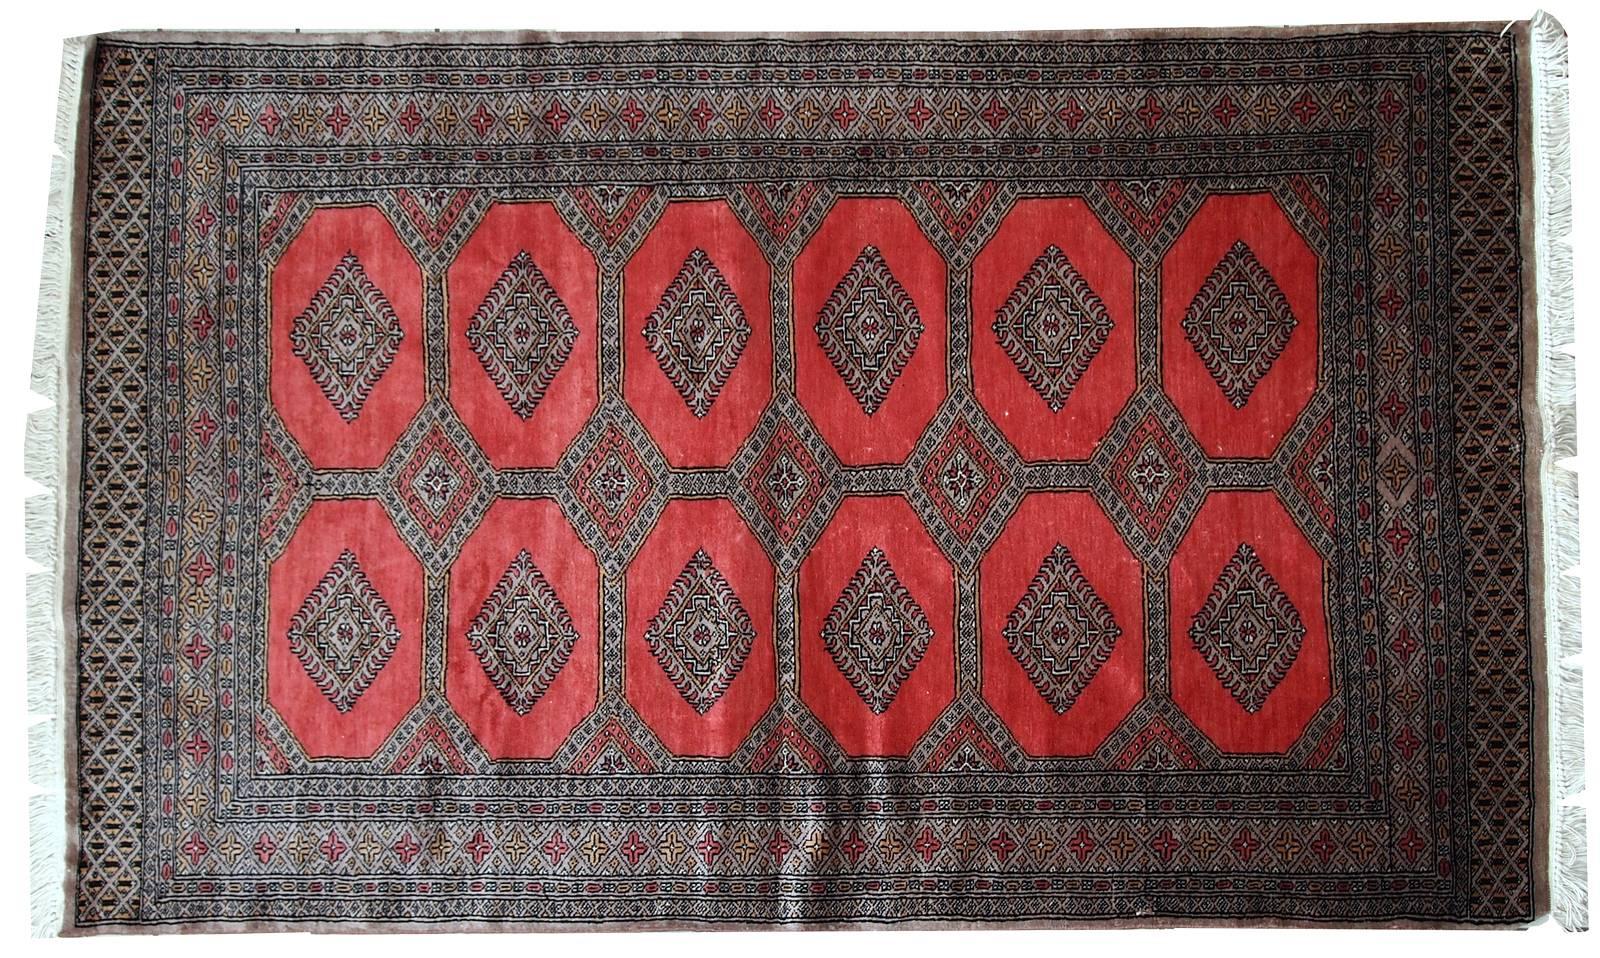 Vintage handmade Uzbek Bukhara rug in original condition. The rug made in classic Bukhara design. Bright red background decorated repeating ornaments and surrounded by a grey (light burgundy shade) border with very precise detailed design. The rug